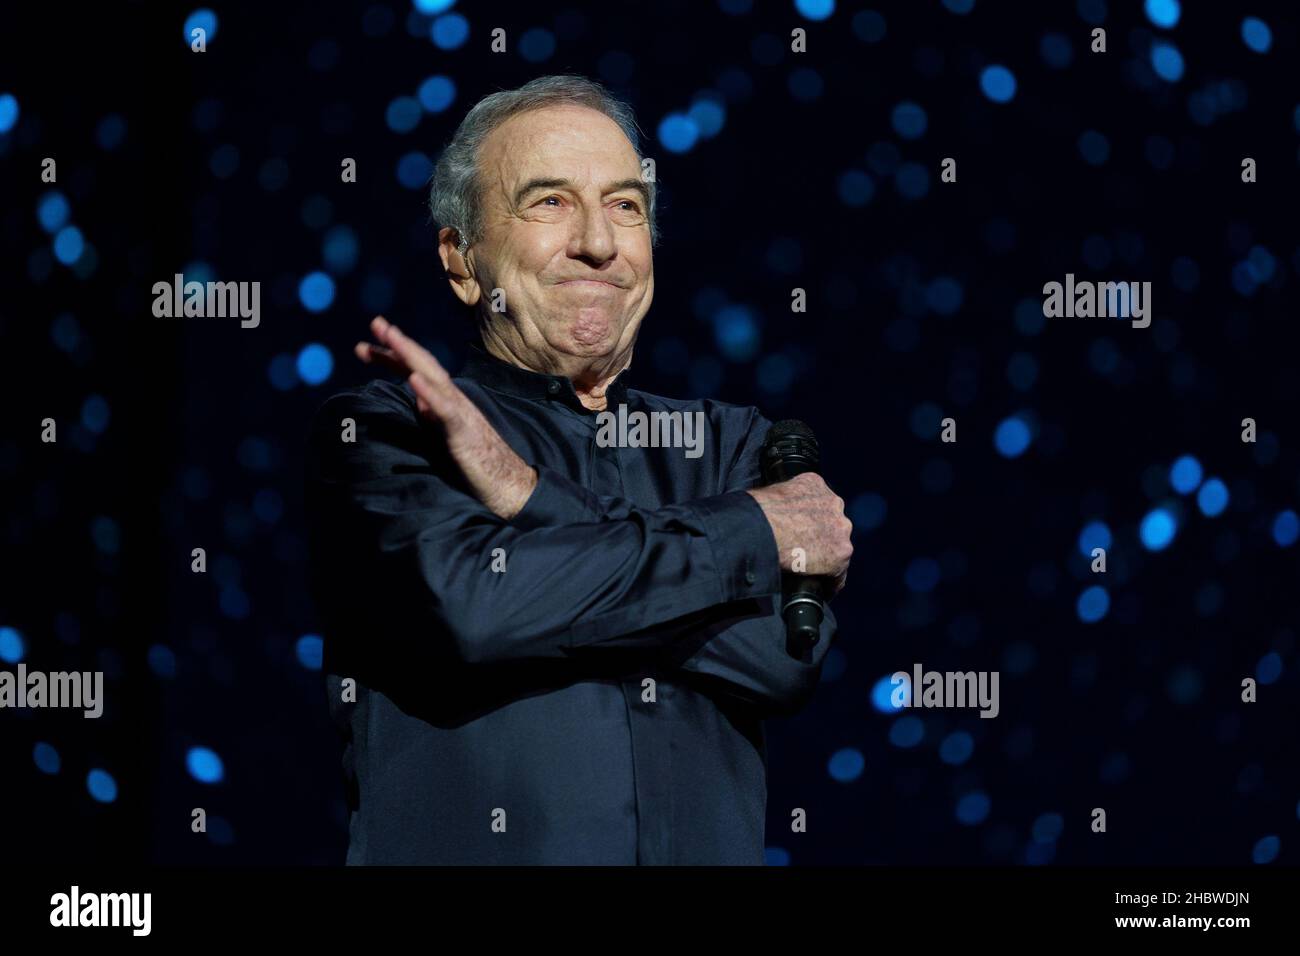 Madrid, Spain. 21st Dec, 2021. Jose Luis Perales the singer seen during his performance at the concert at the Wizink Center. Credit: SOPA Images Limited/Alamy Live News Stock Photo